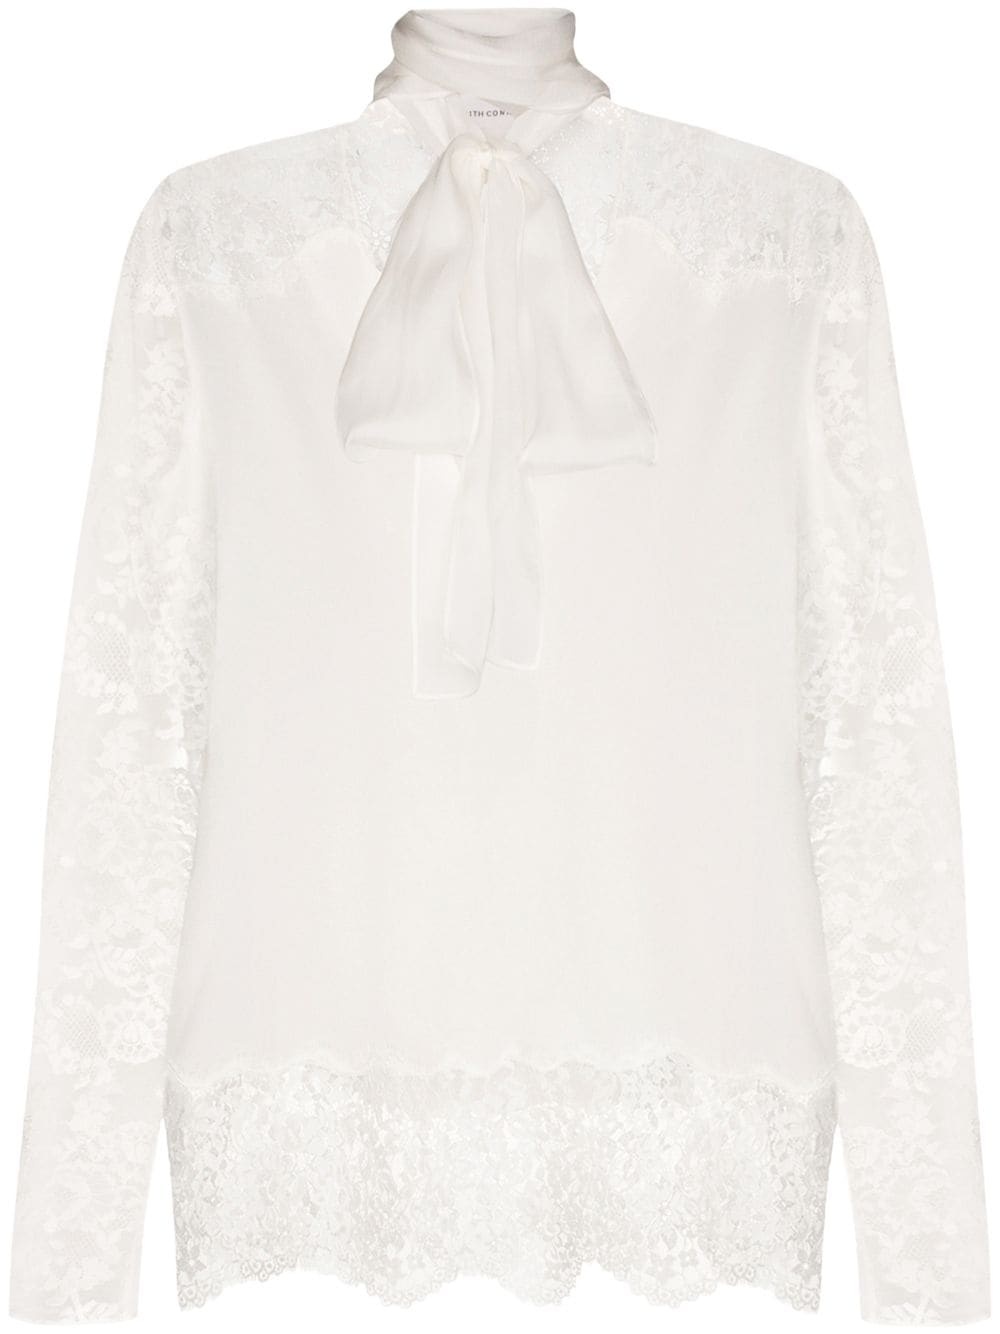 Lace detail pussy bow blouse - 1